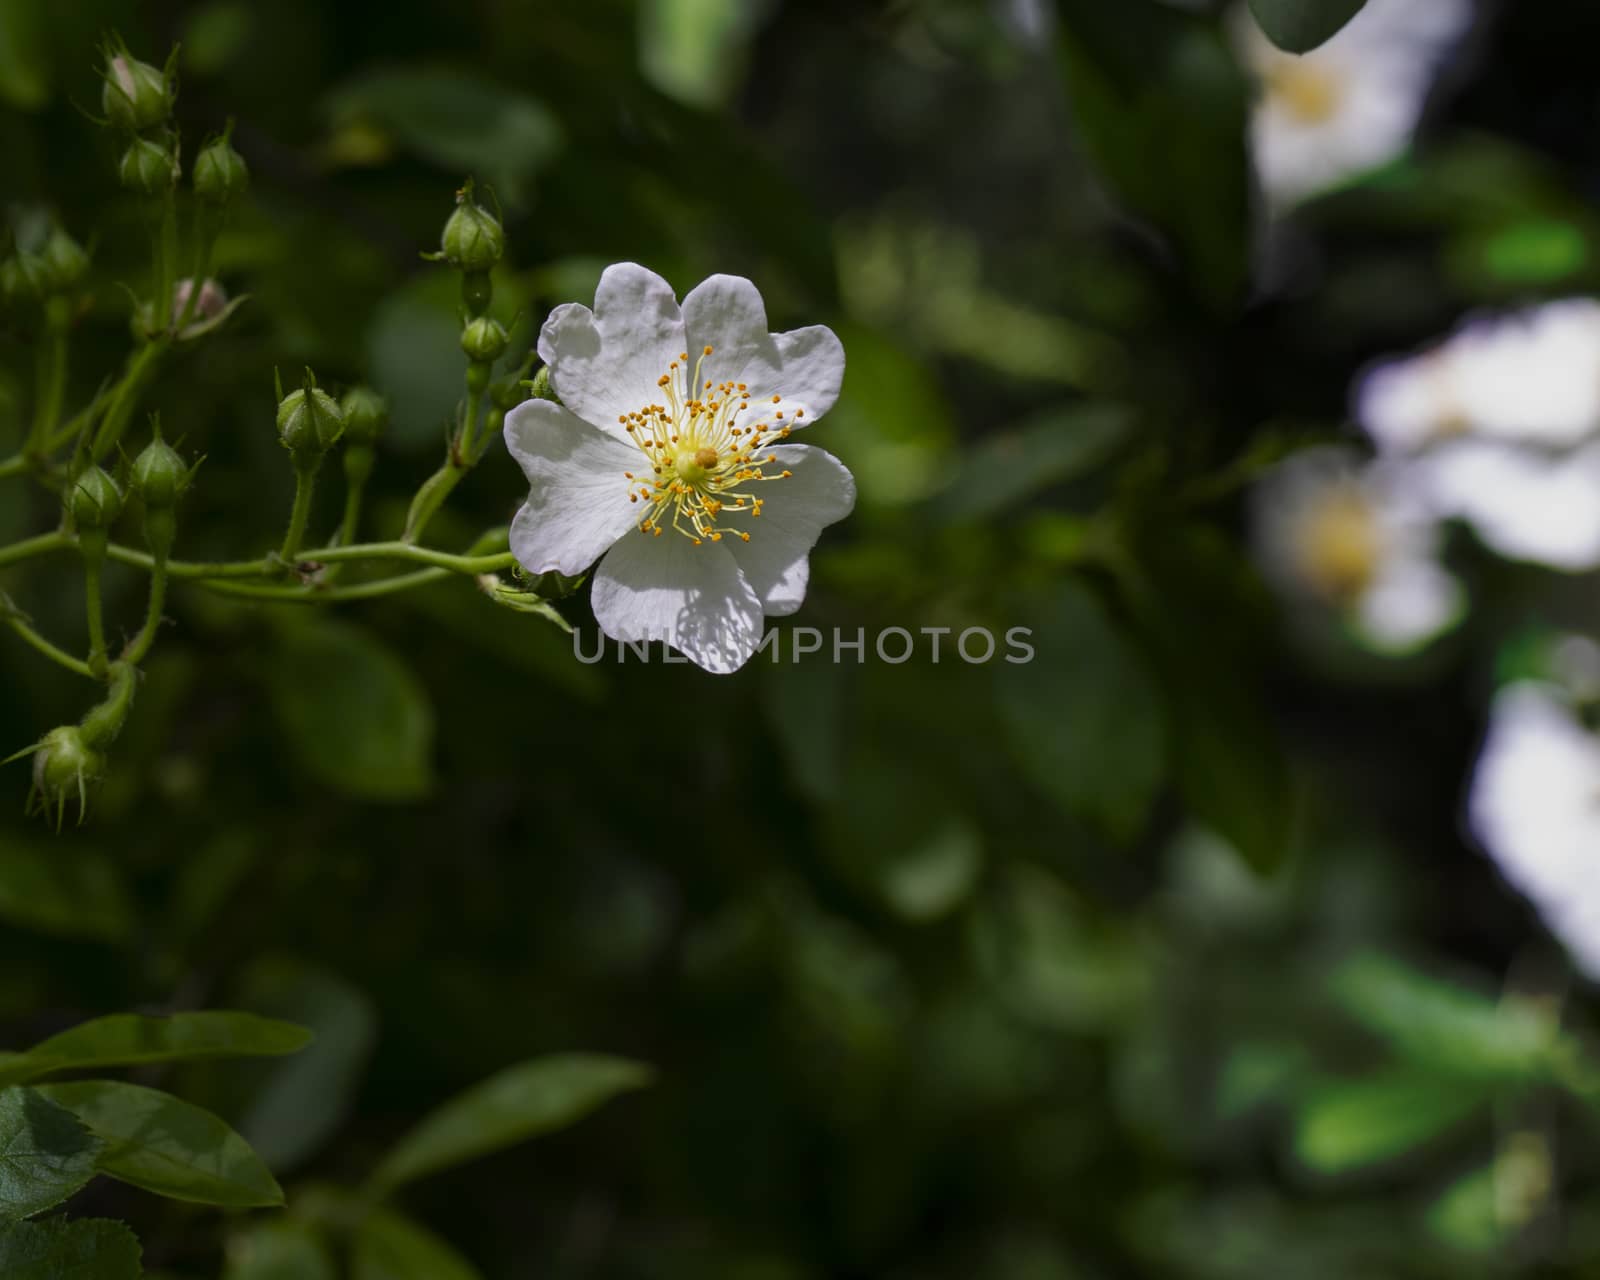 Delicate Blackberry Bloom Shines by CharlieFloyd